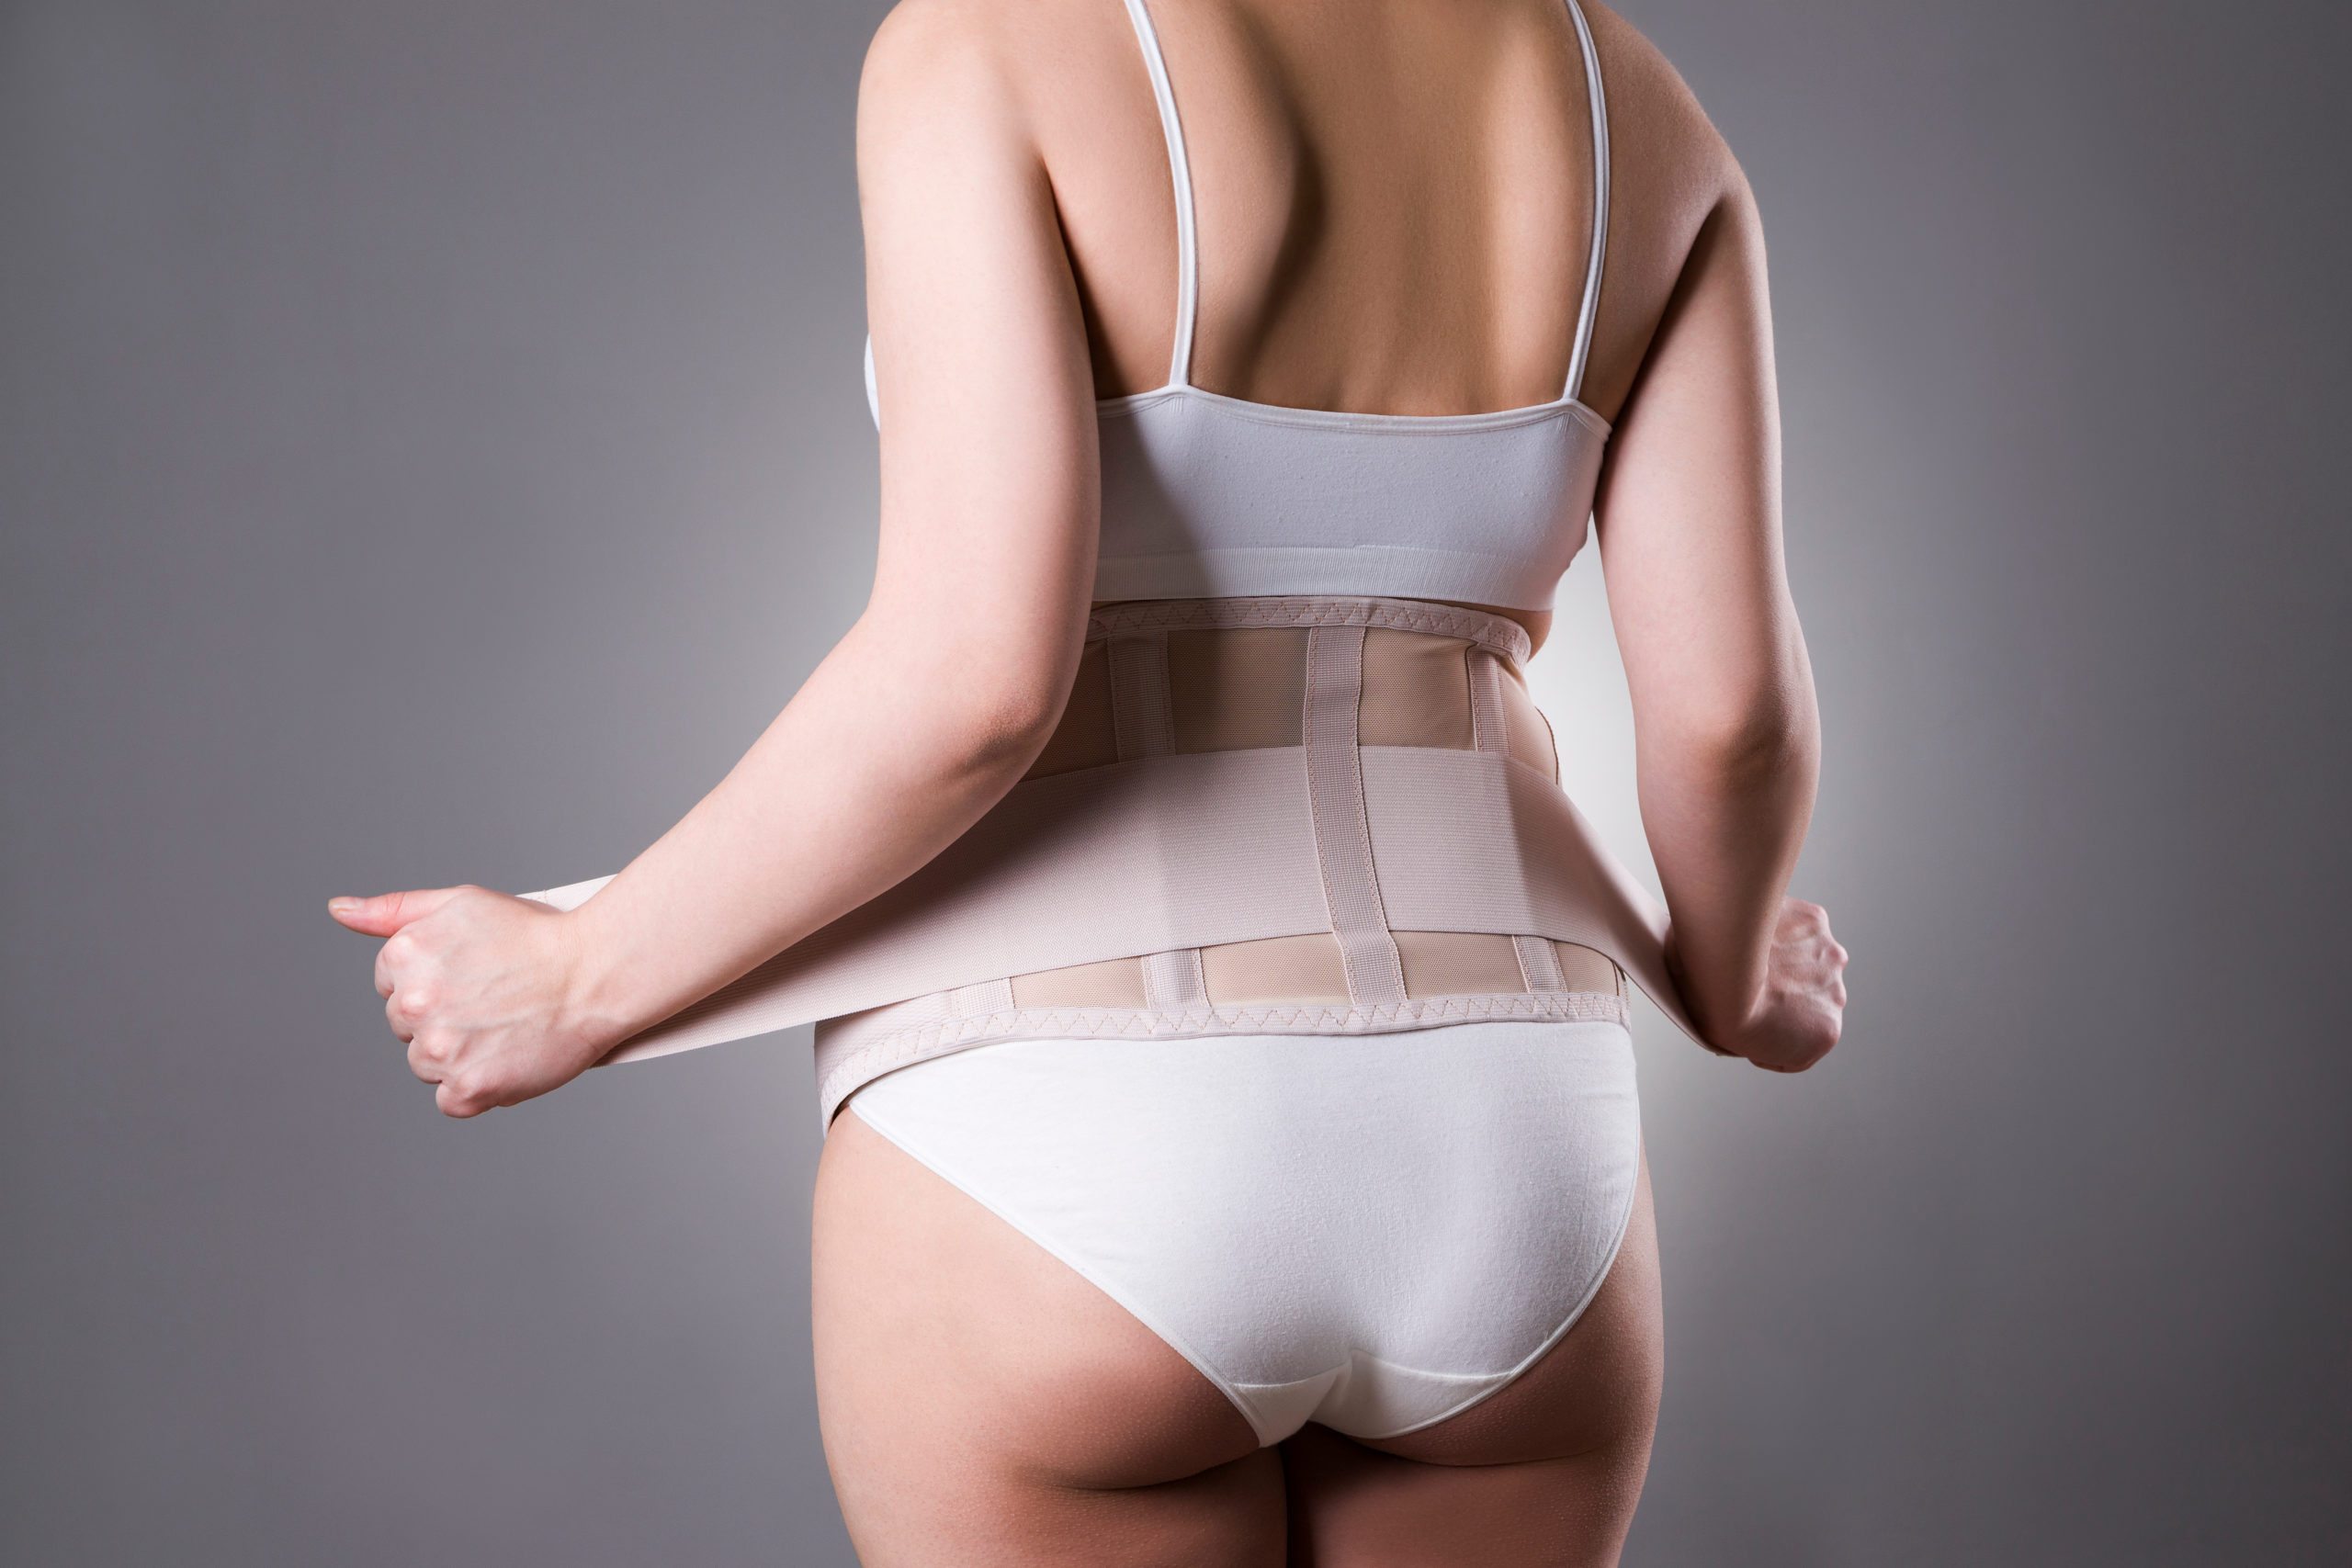 woman putting on a compression garment after body contouring surgery